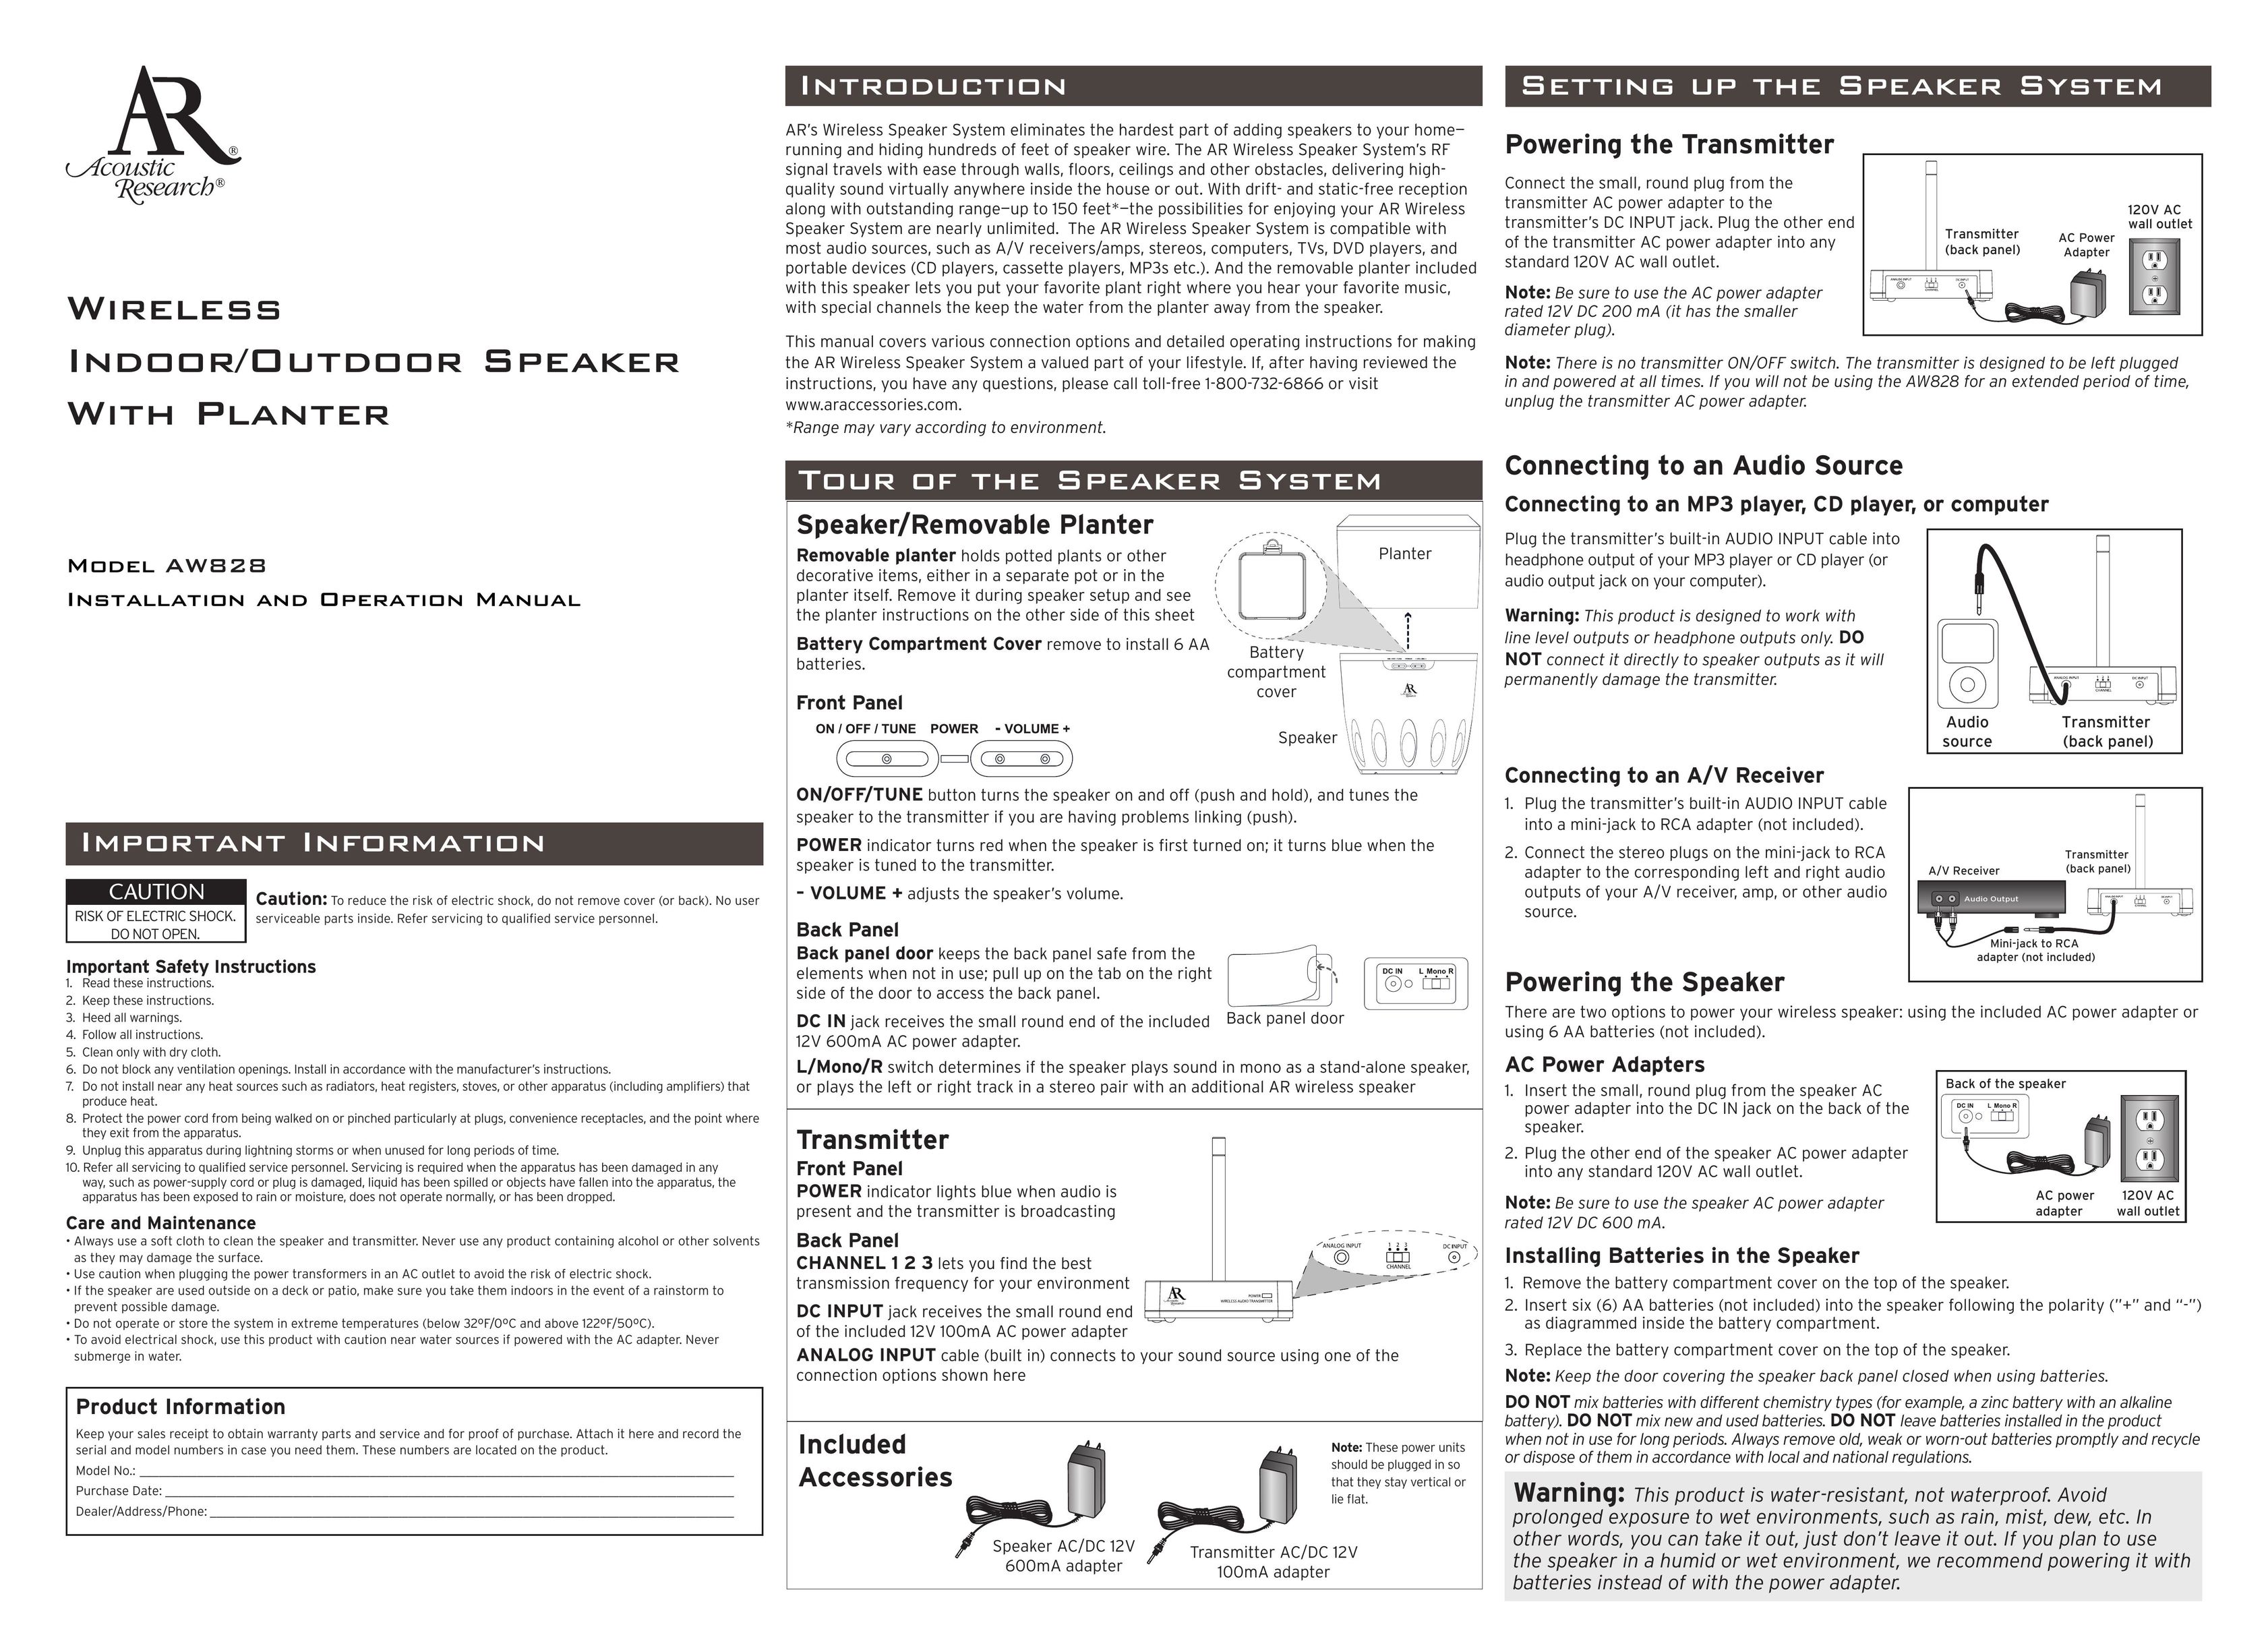 Acoustic Research AW828 Speaker System User Manual